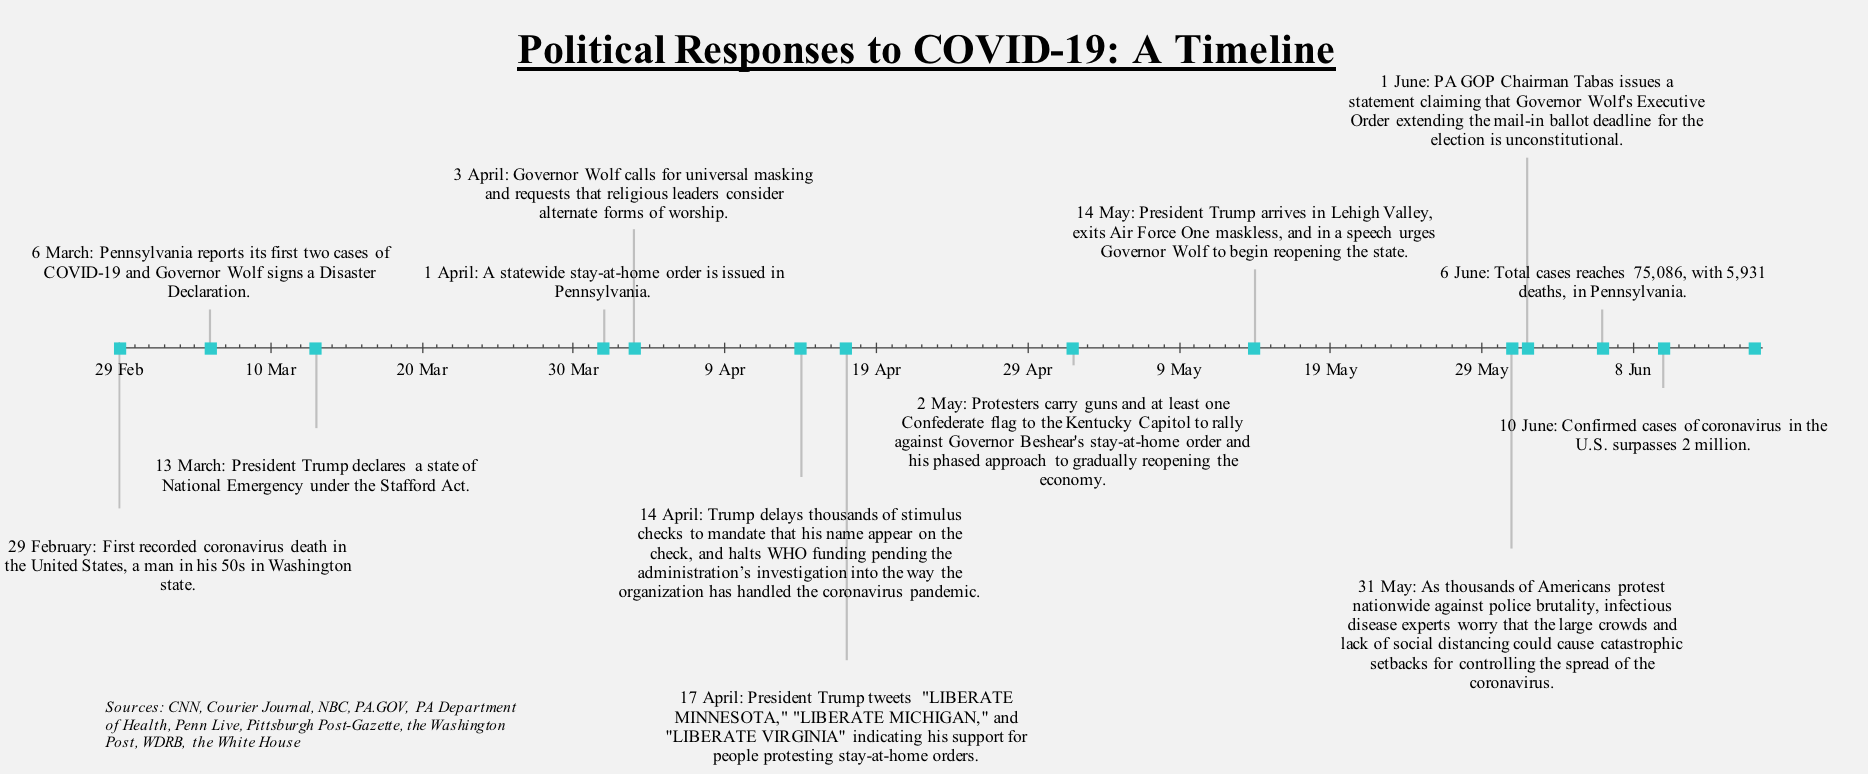 Timeline title “Political Responses to COVID”